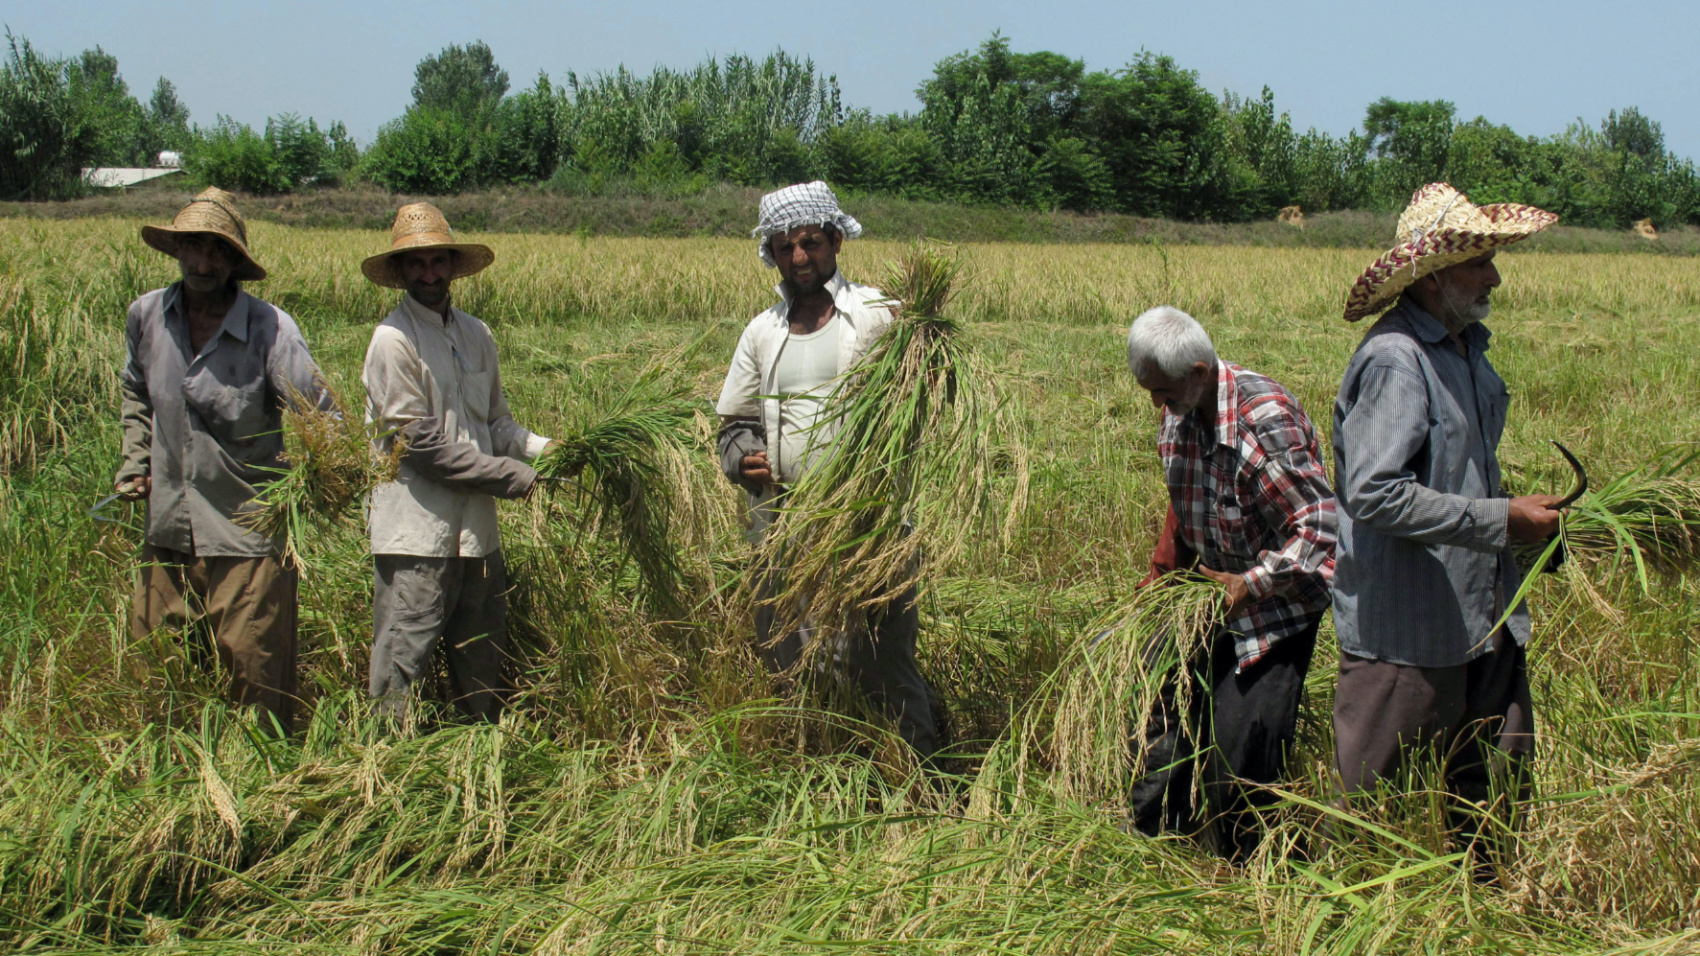 Iranian villagers work in a rice field during the annual harvest season on the outskirts of the city of Amol, in Mazandran province, on 30 July 2011 (AFP)